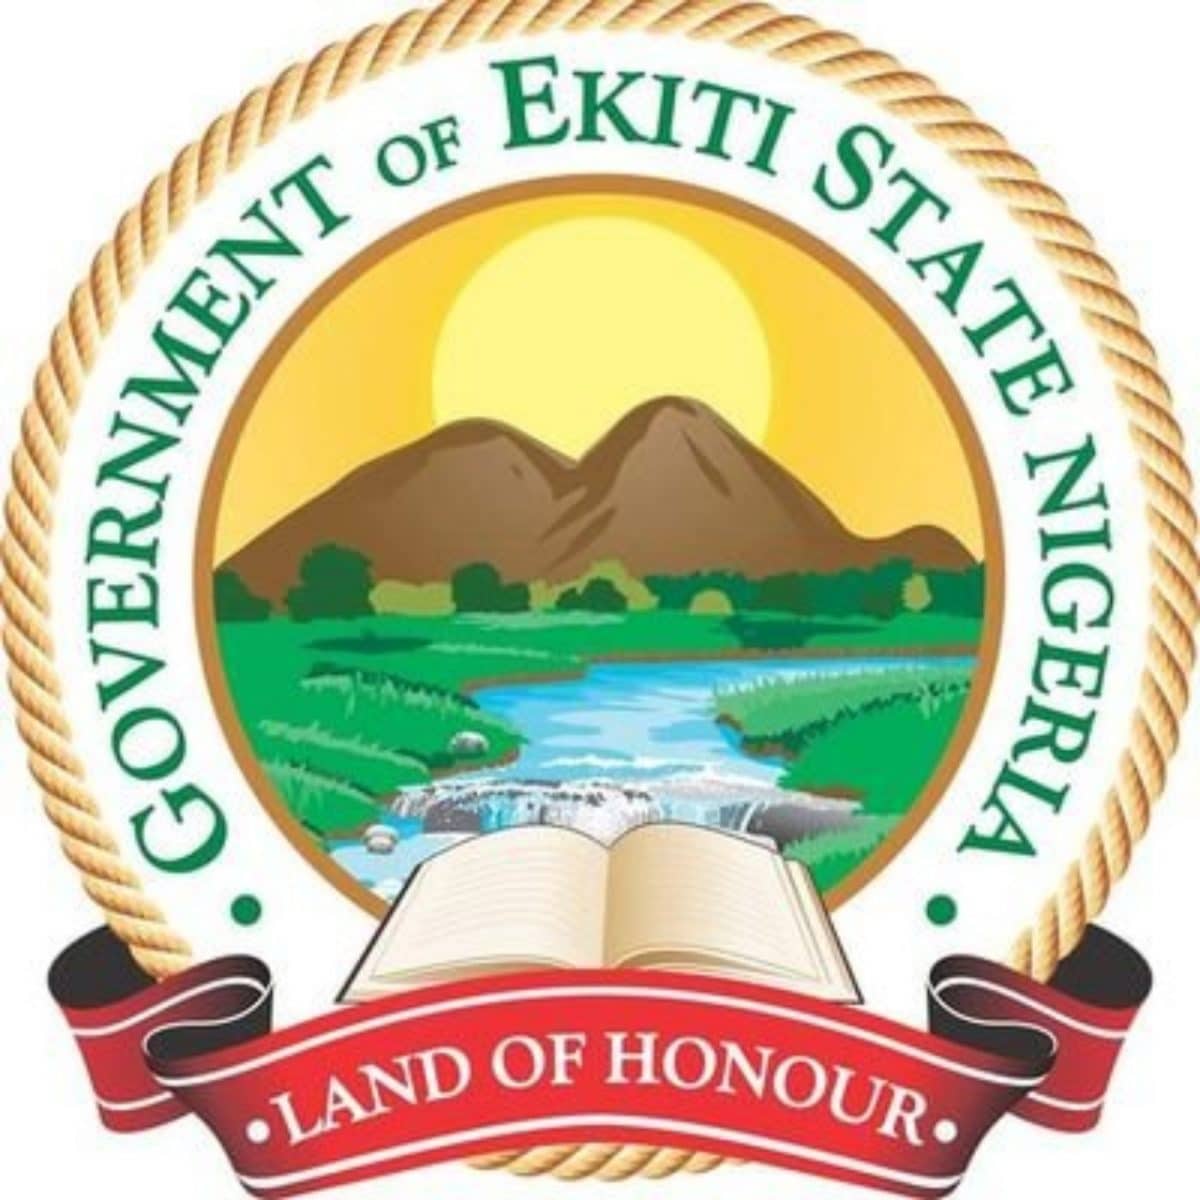 AFCON 2023 final: ‘Don’t watch live if you have heart issue’ – Ekiti State Govt warns citizens